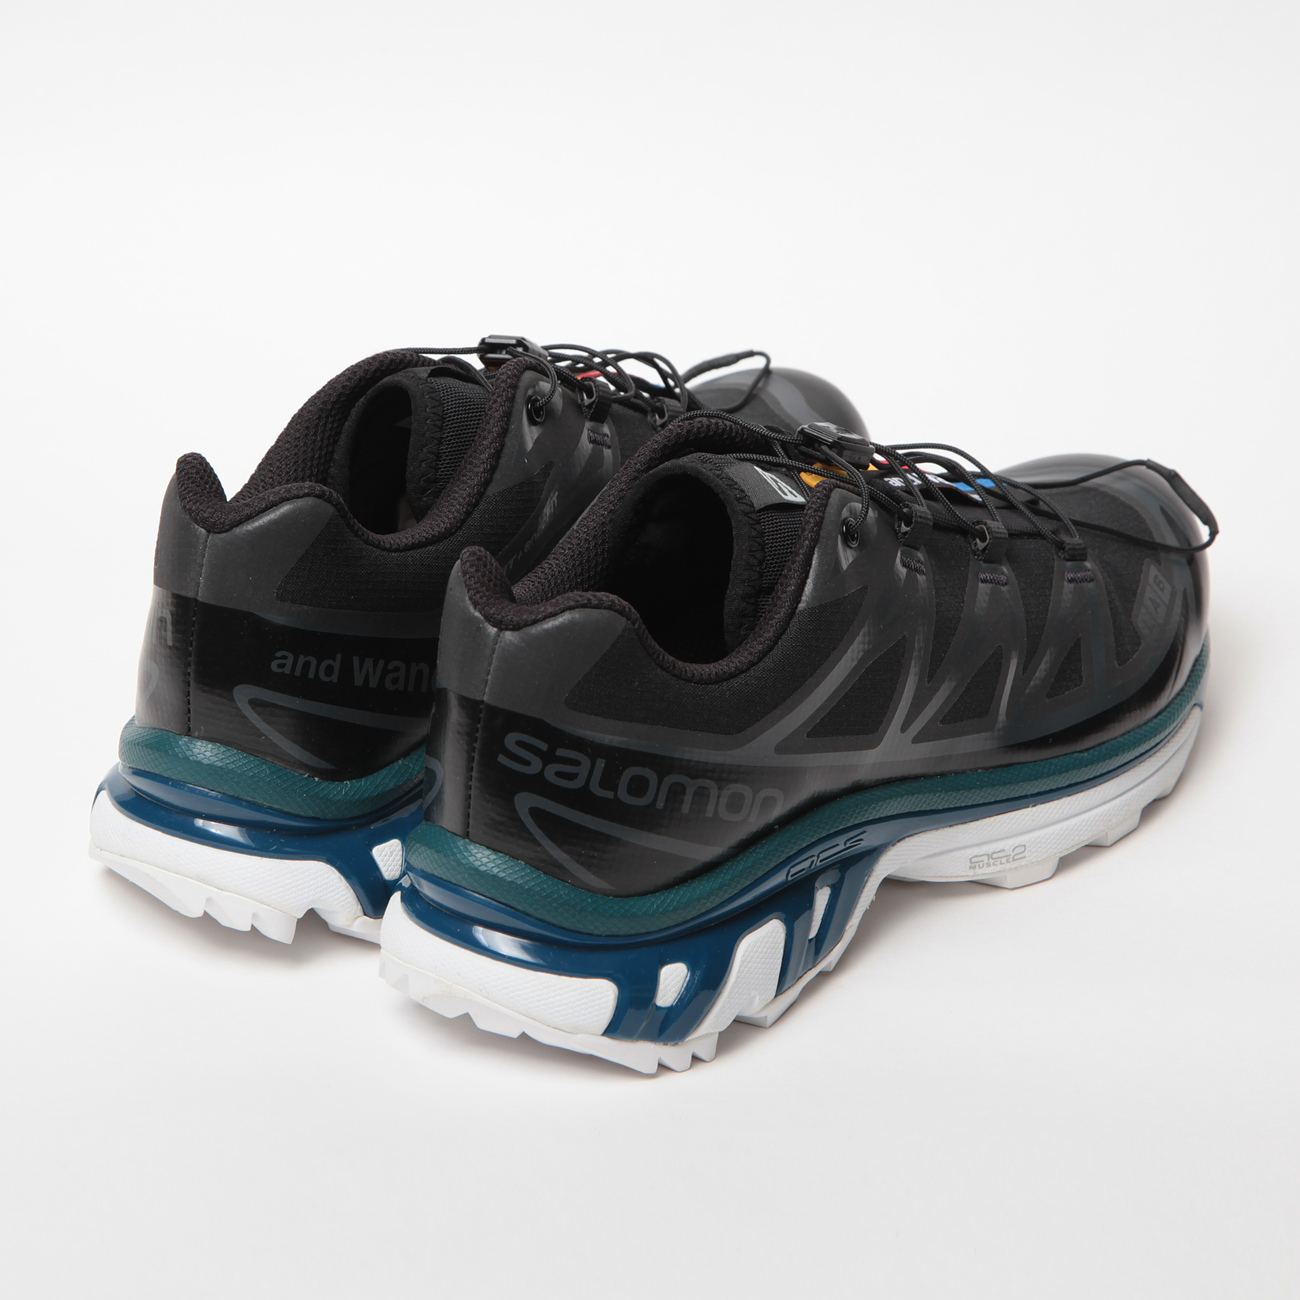 and wander / アンドワンダー | SALOMON XT-6 for and wander - Black ...